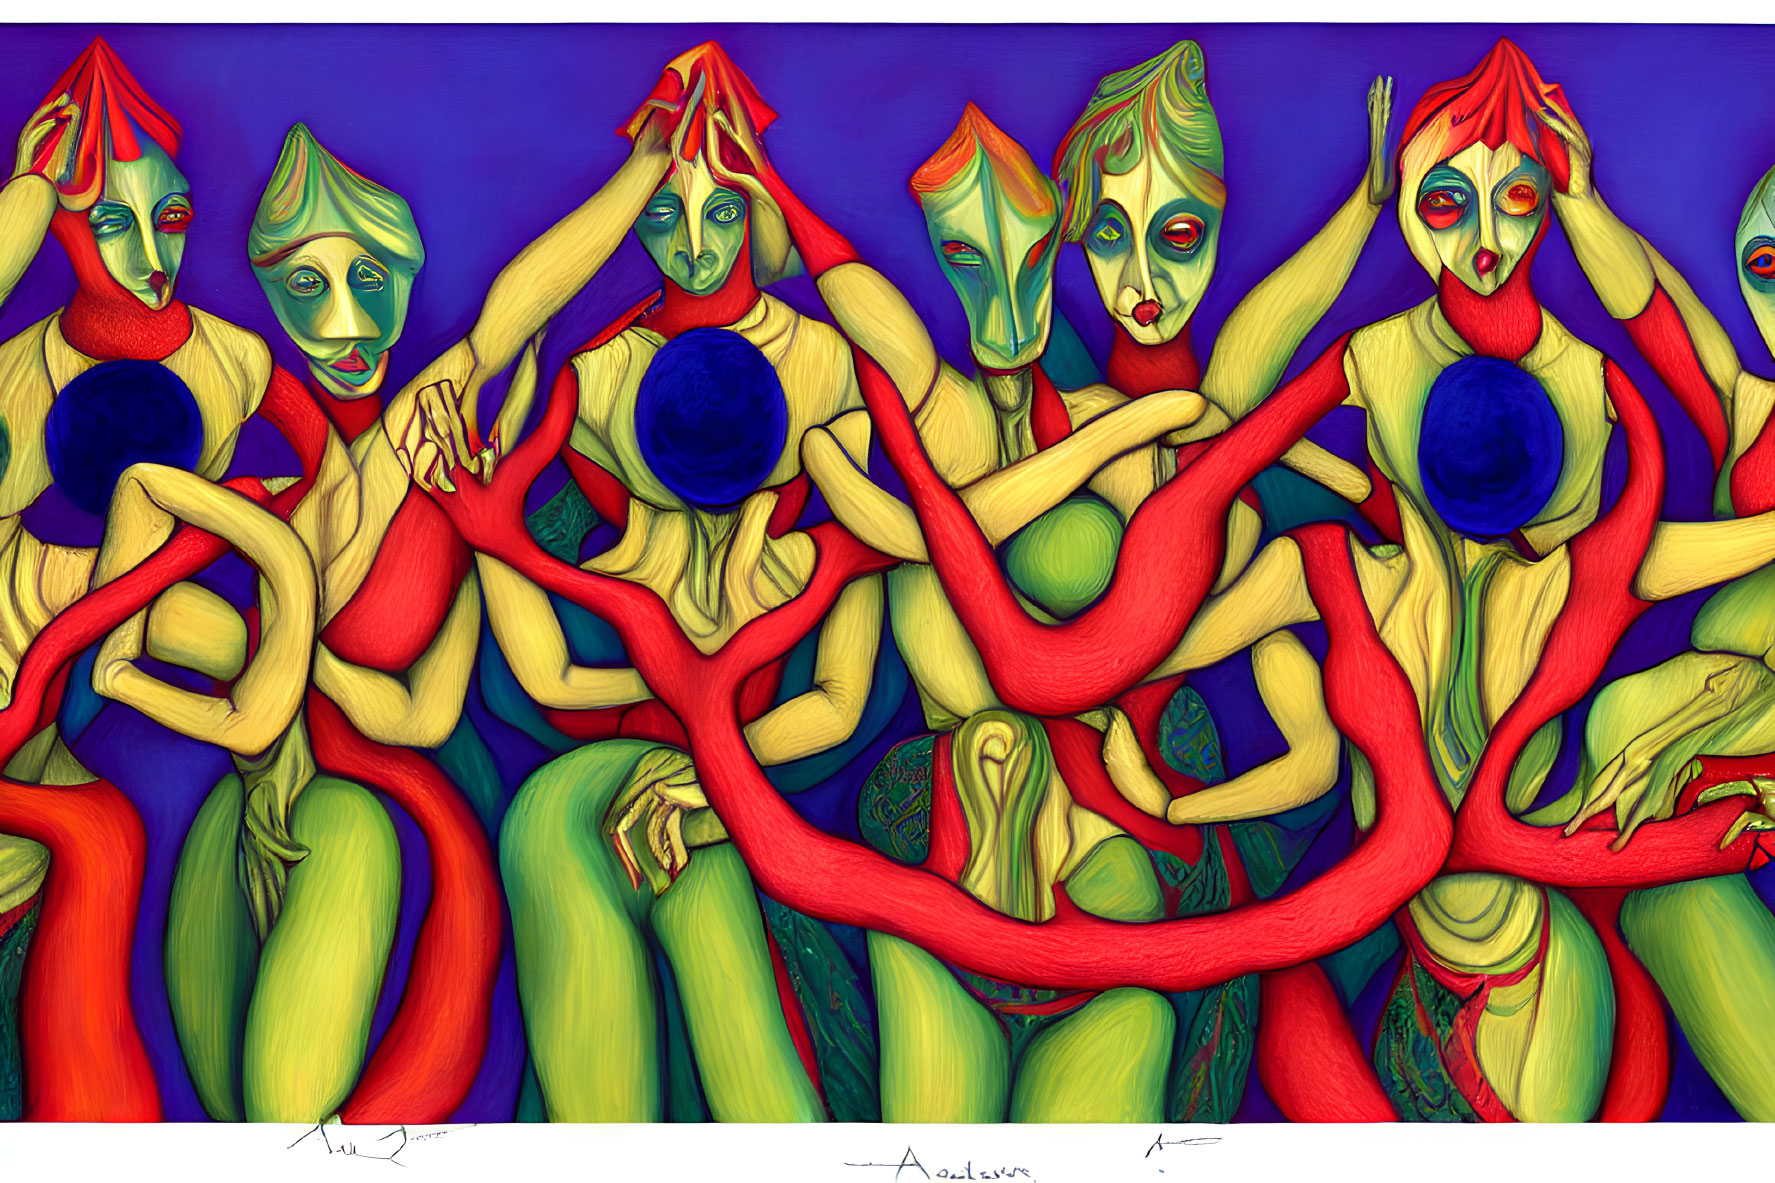 Colorful surreal painting of intertwined human-like figures in red, green, blue, and yellow